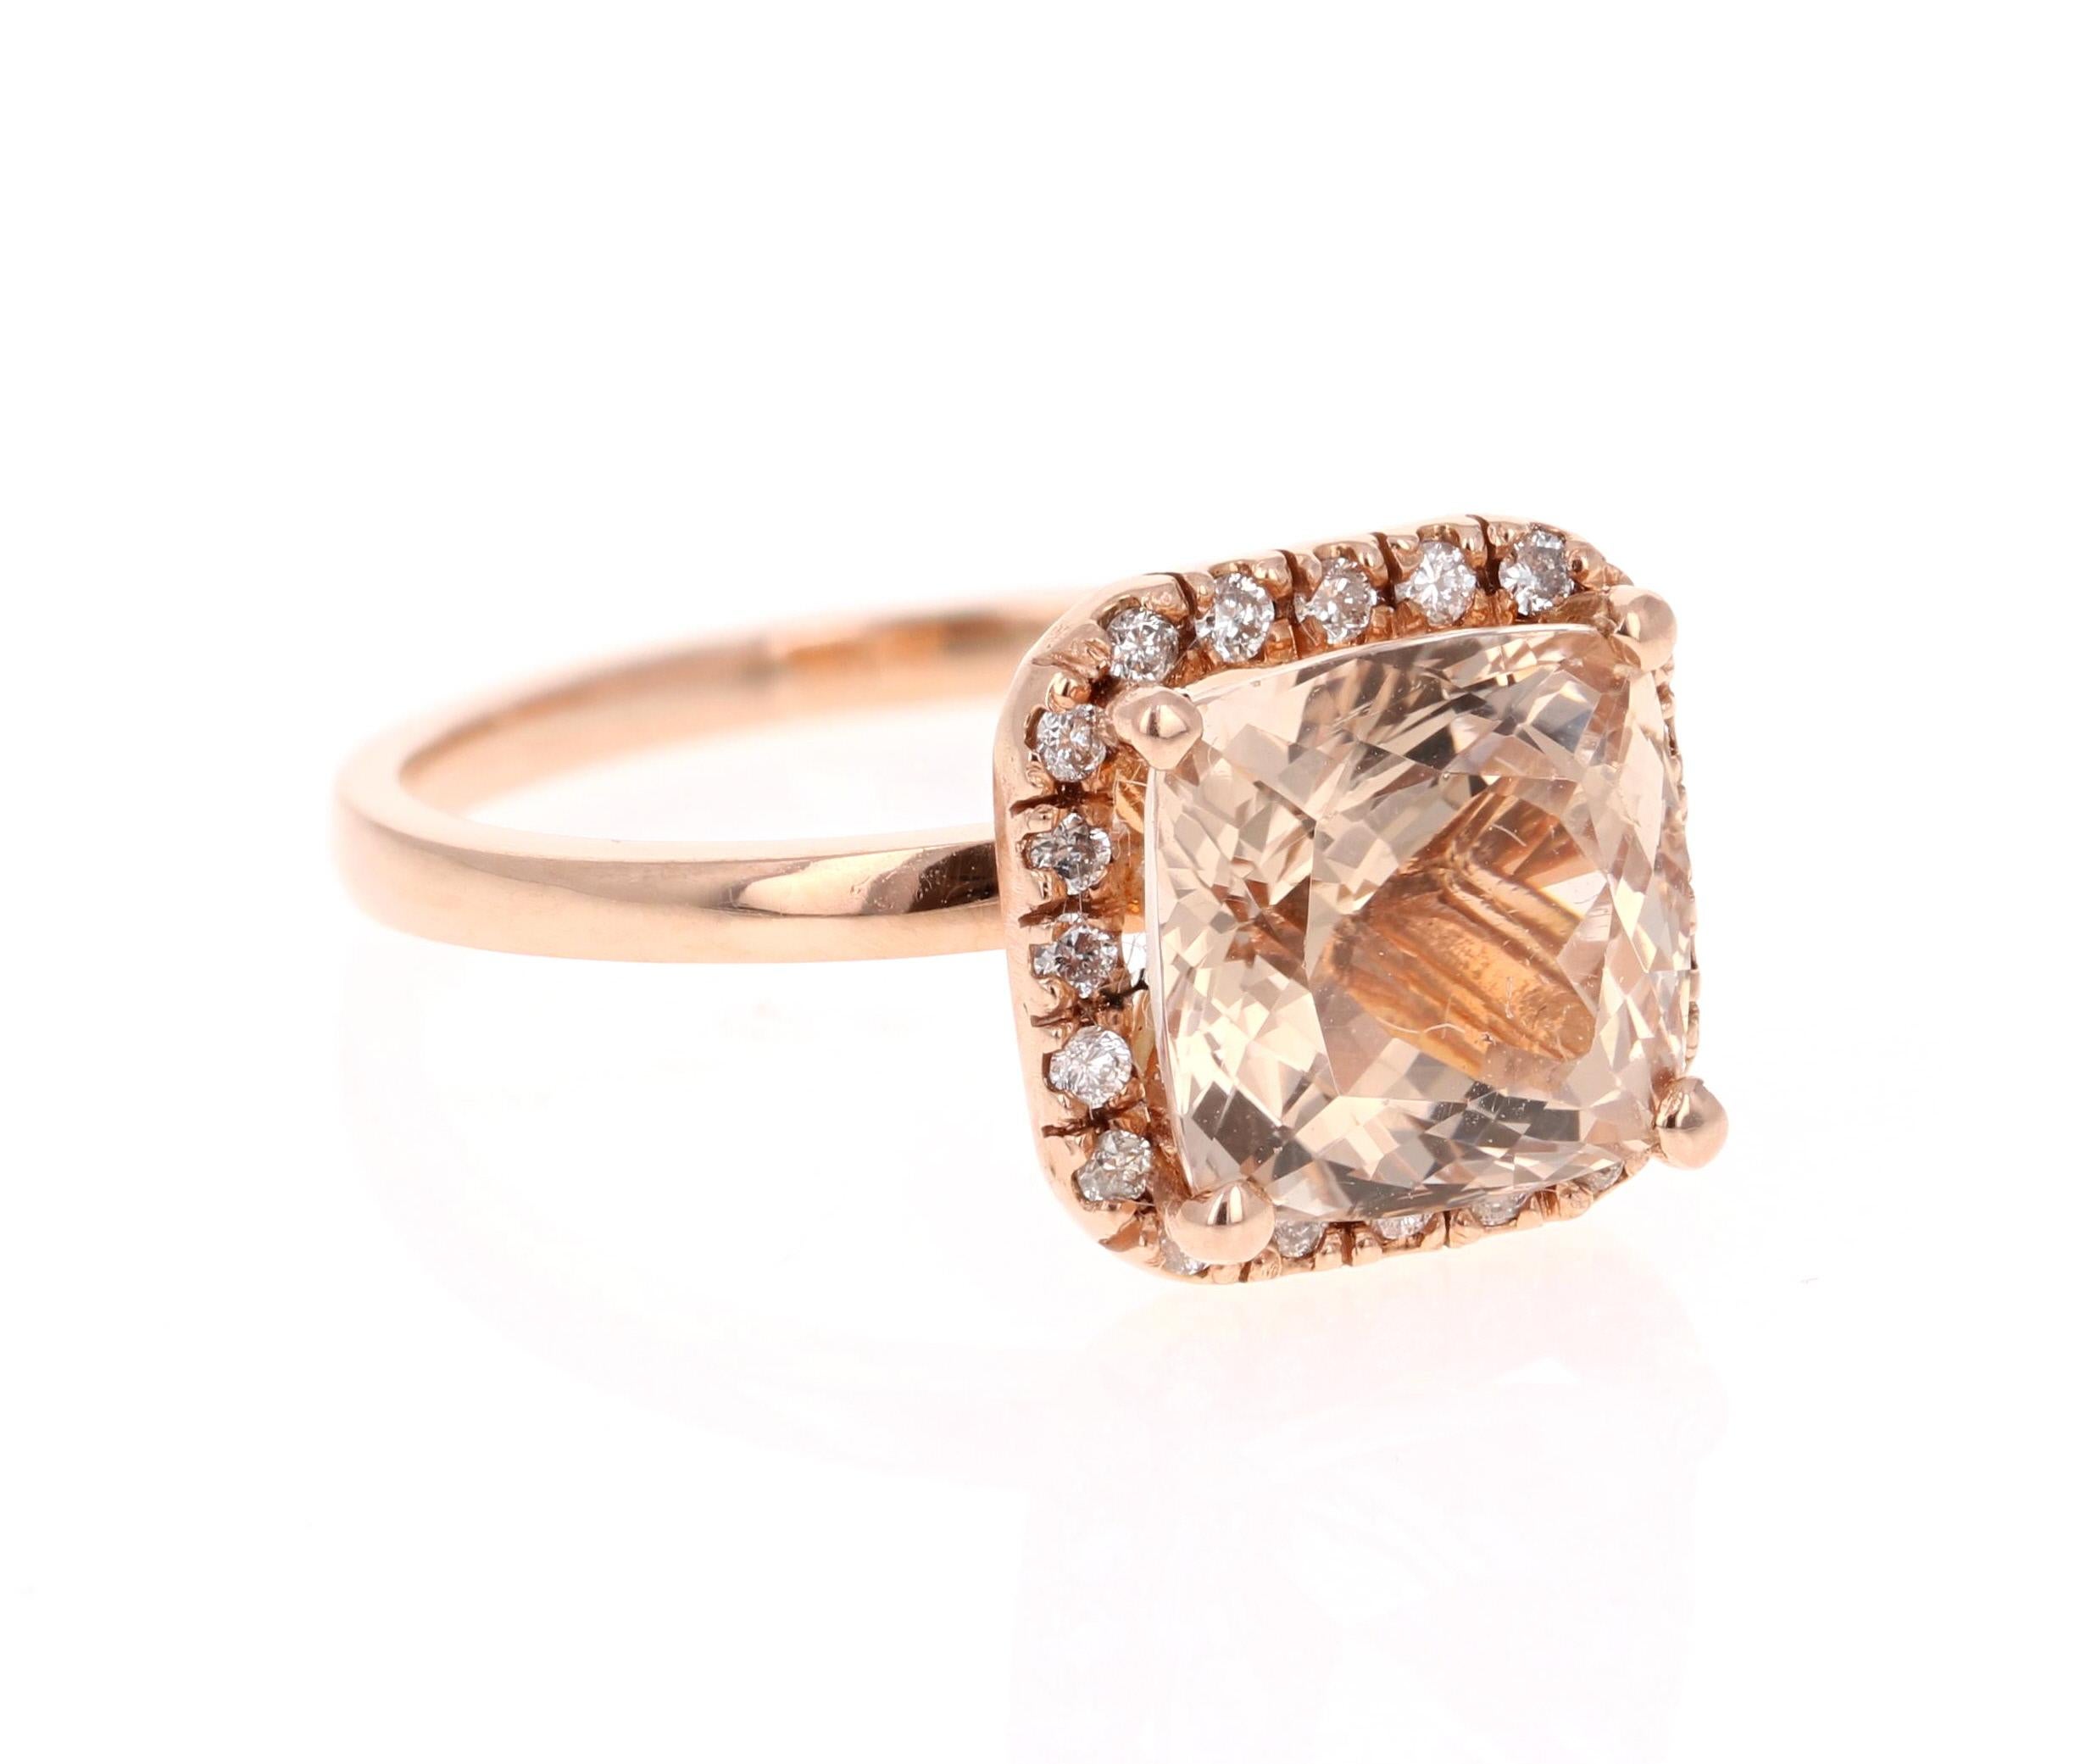 This Morganite ring has a 3.90 Carat Square Cushion Cut Morganite and is surrounded by 20 Round Cut Diamonds that weigh 0.19 Carats. The total carat weight of the ring is 4.09 Carats. 

It is crafted and set in 14 Karat Rose Gold and weighs